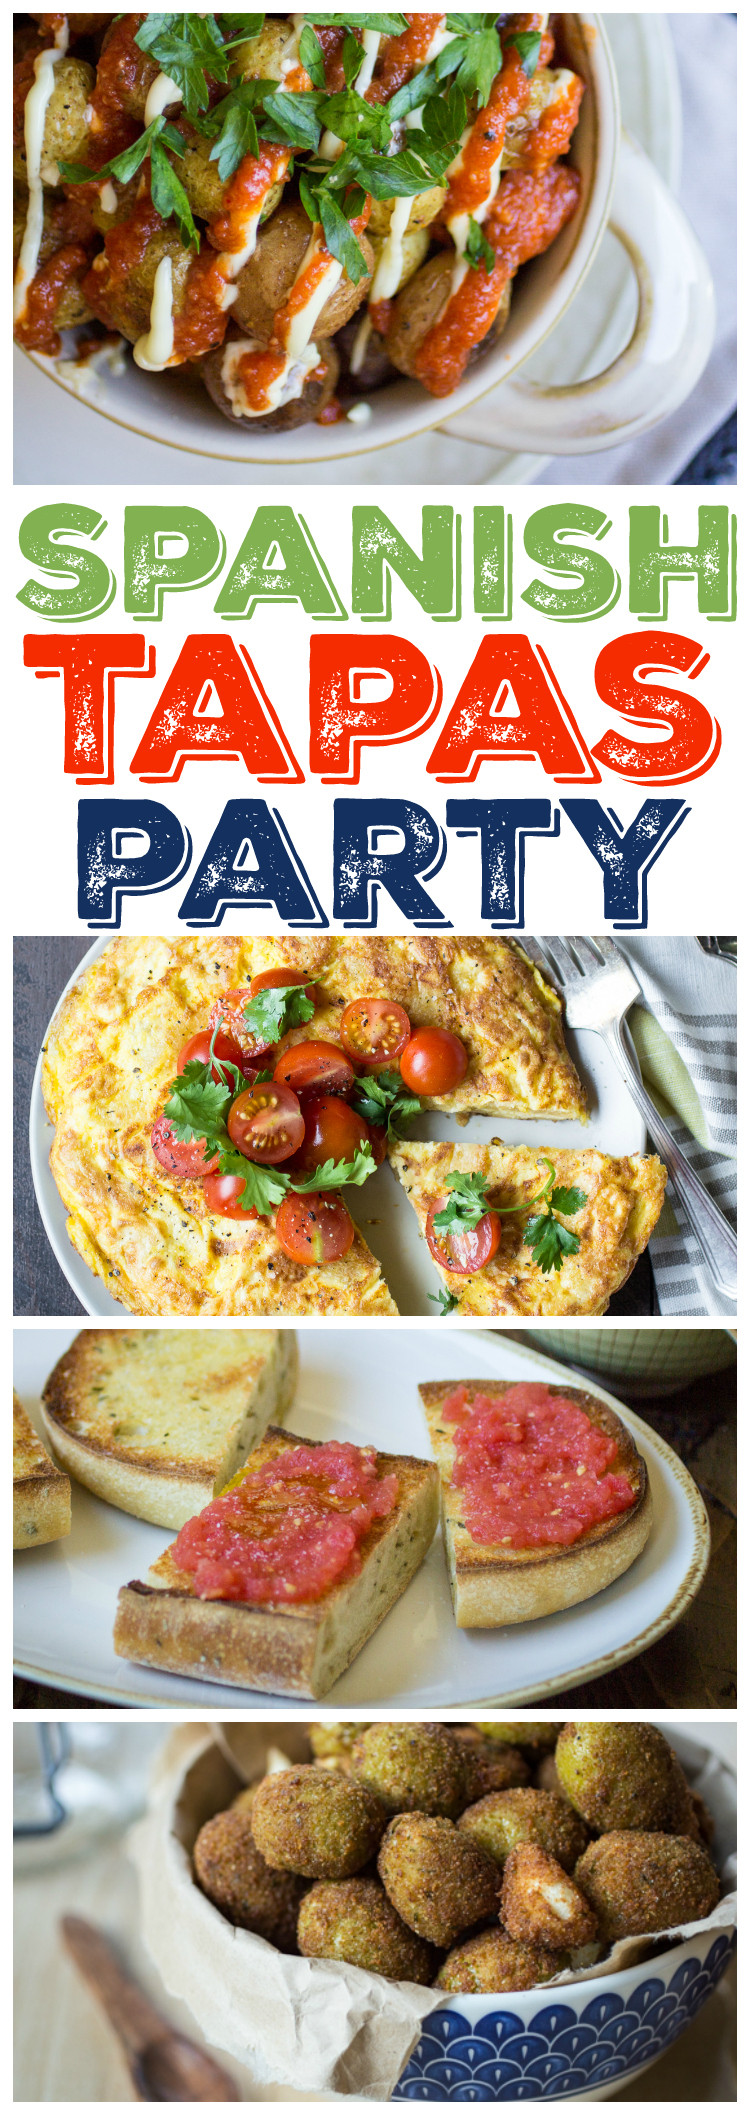 Tapas Ideas For Dinner Party
 Spanish Tapas Party The Wanderlust Kitchen